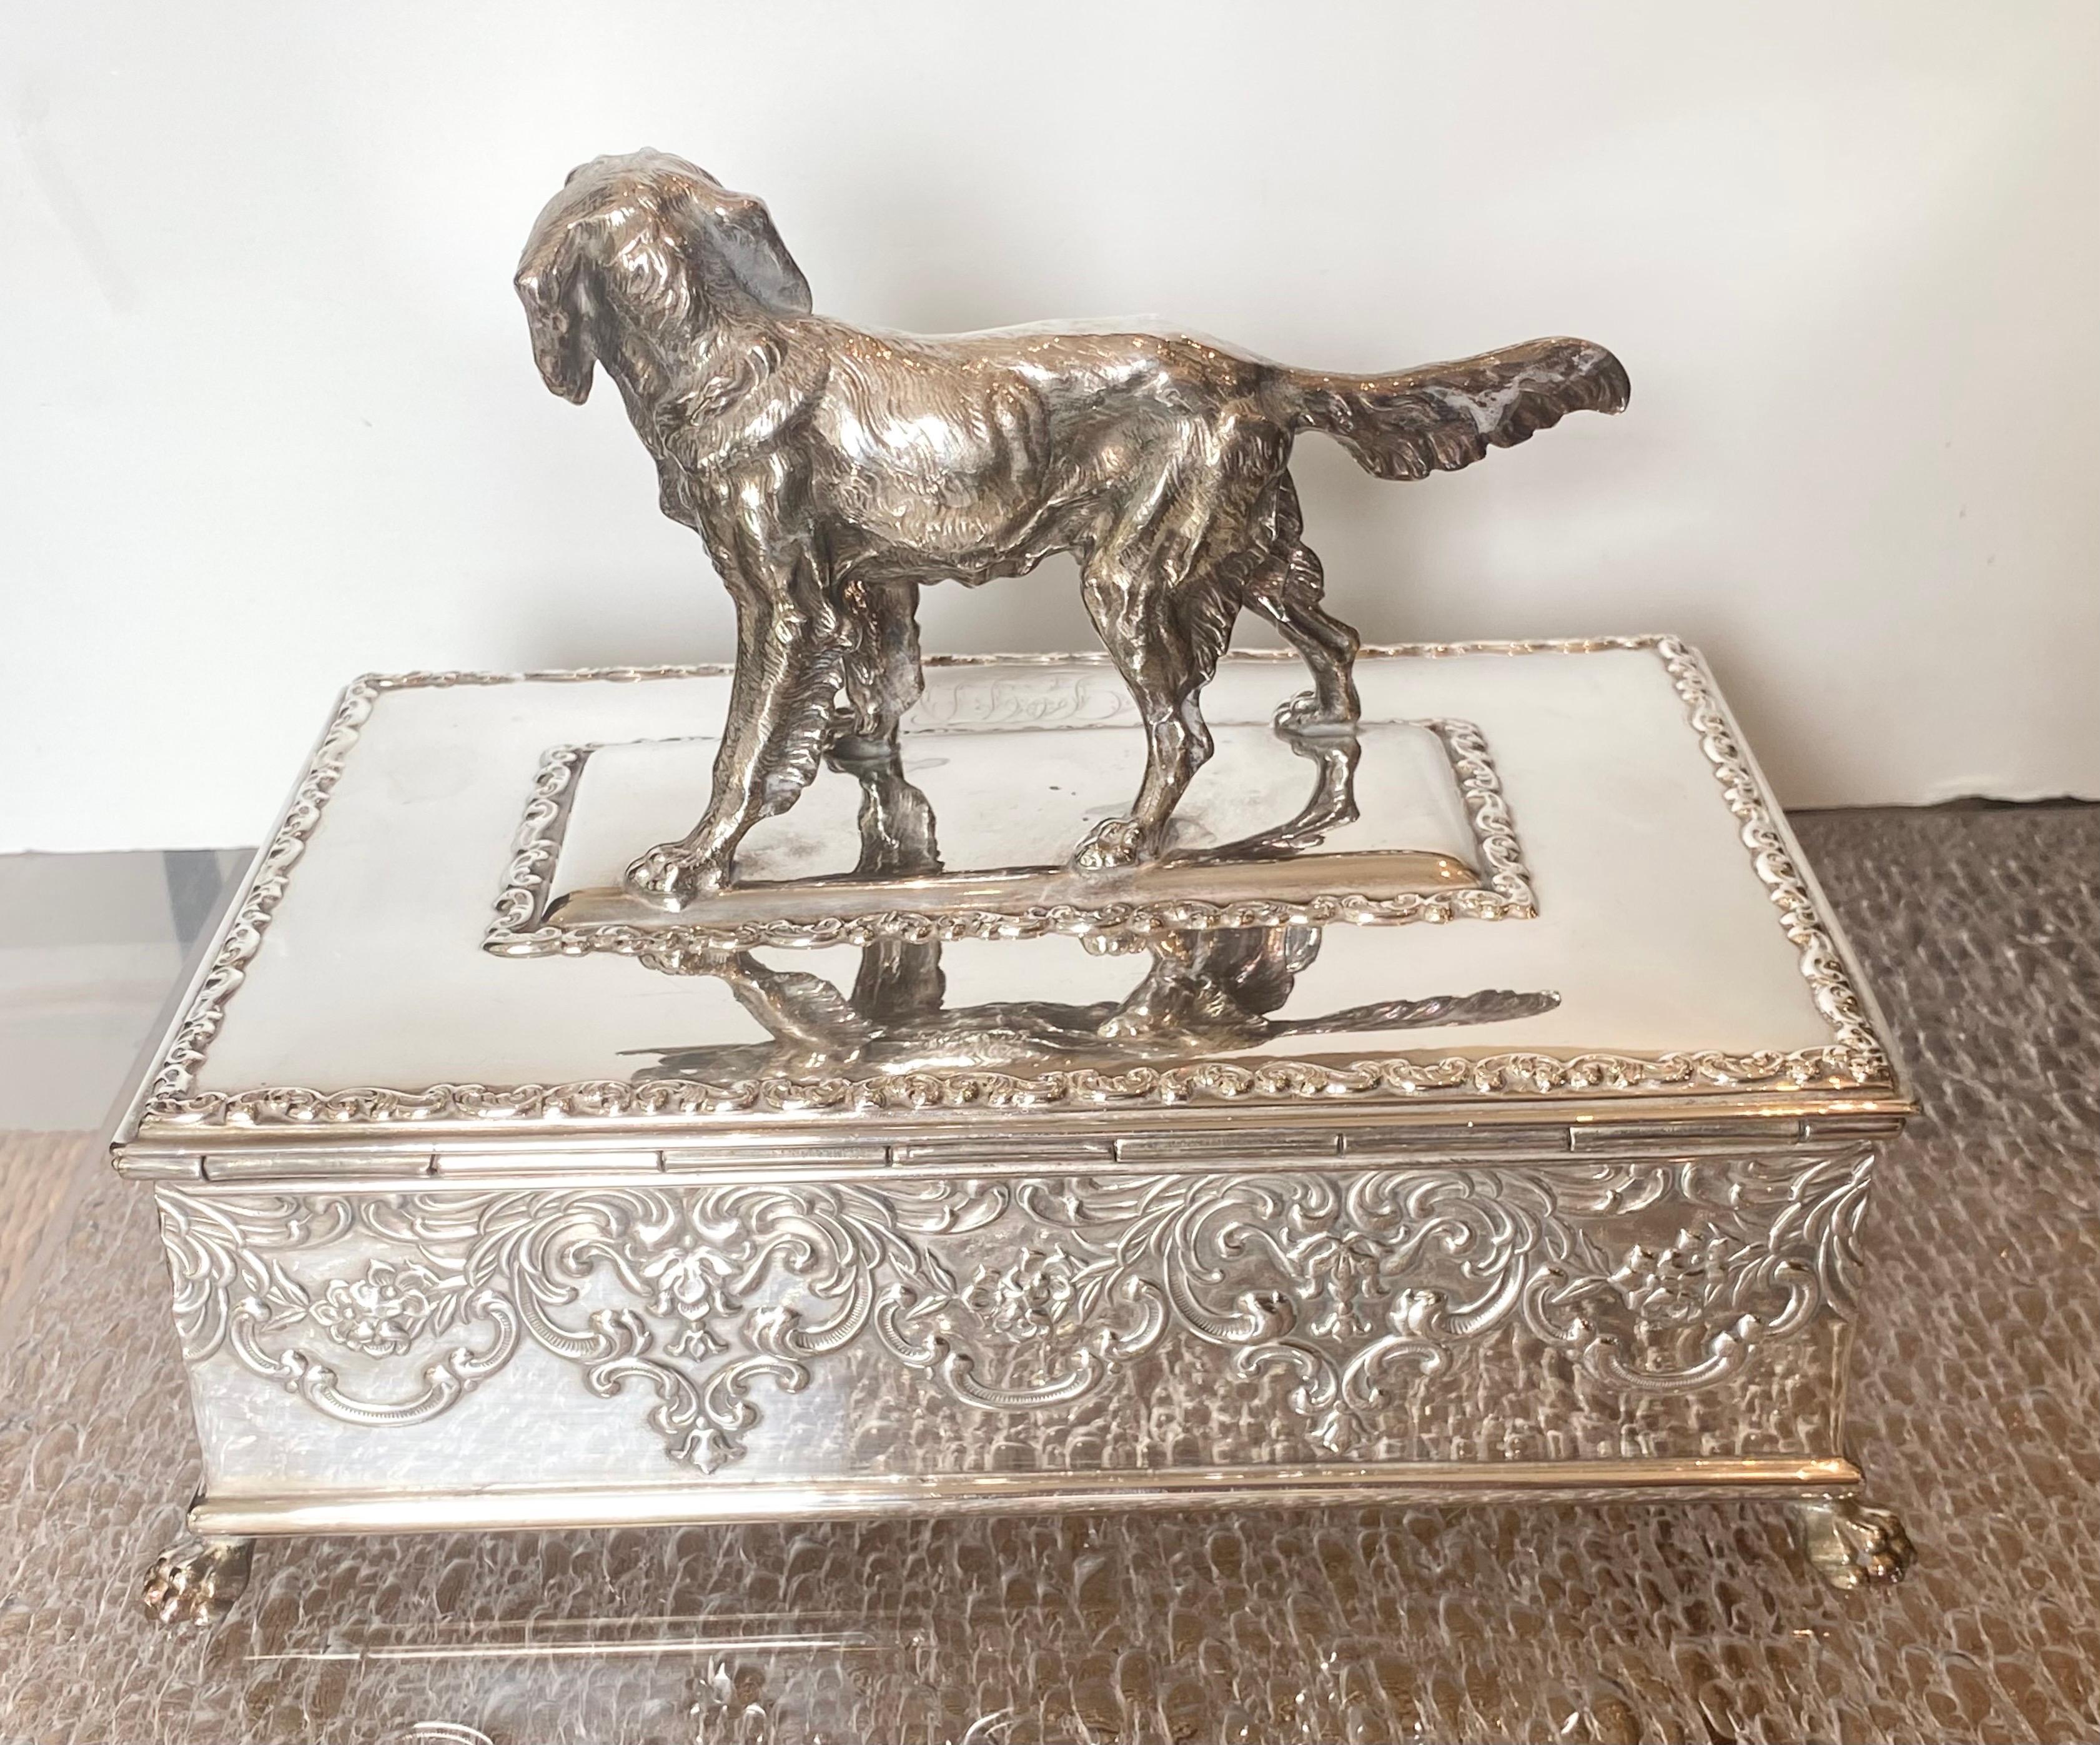 Silver Plate Humidor with Retriever For Sale 5